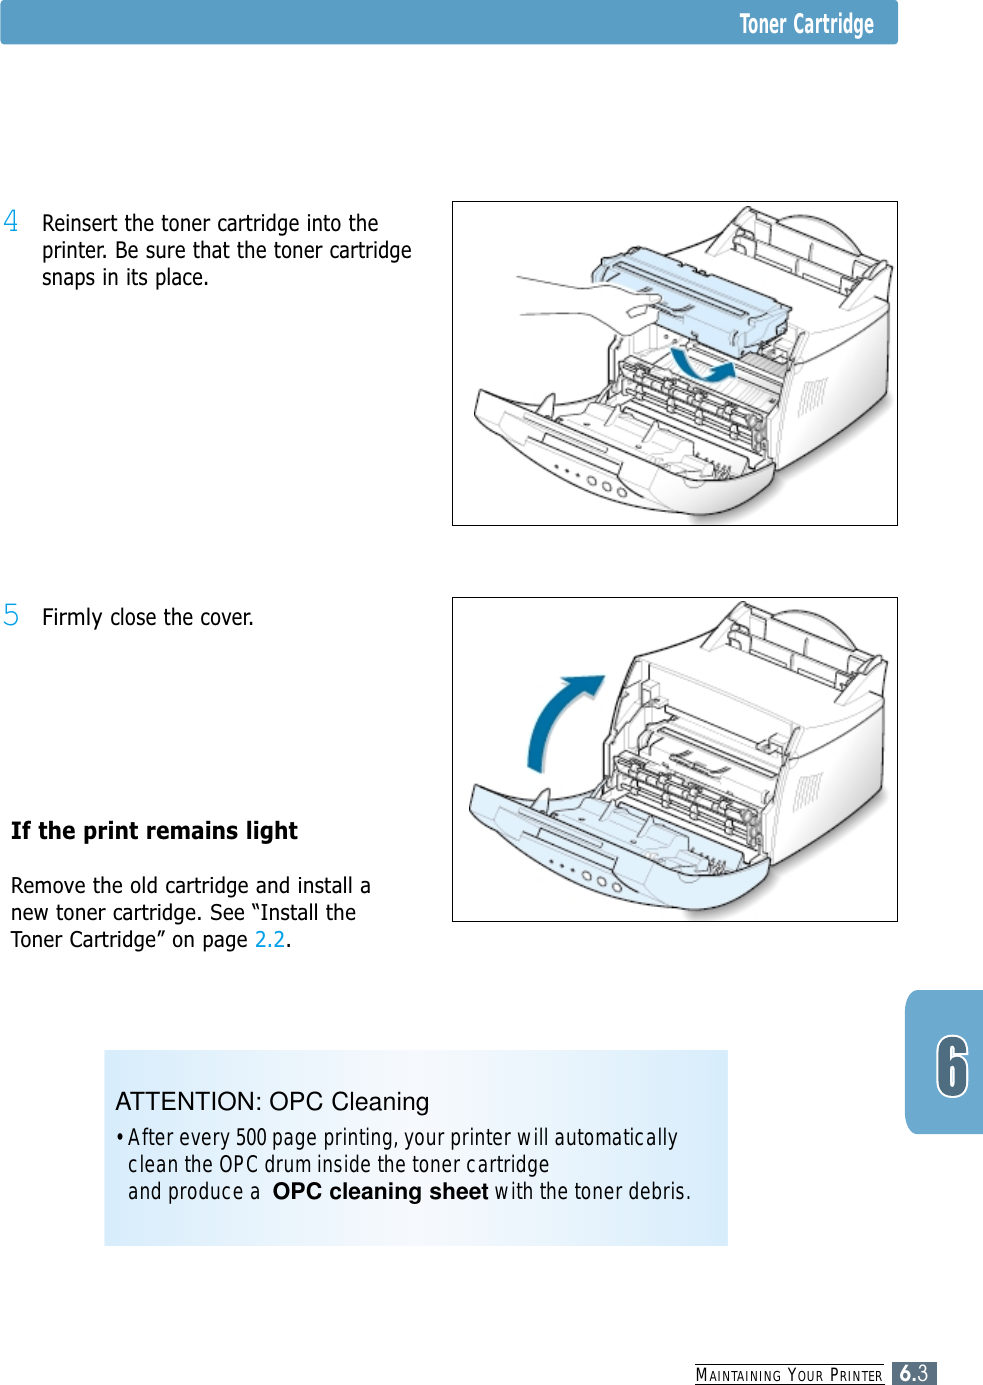 MAINTAINING YOUR PRINTER6.3Toner Cartridge4Reinsert the toner cartridge into theprinter. Be sure that the toner cartridgesnaps in its place.5Firmly close the cover.If the print remains light Remove the old cartridge and install anew toner cartridge. See “Install theToner Cartridge” on page 2.2.ATTENTION: OPC Cleaning• After every 500 page printing, your printer will automaticallyclean the OPC drum inside the toner cartridge and produce a  OPC cleaning sheet with the toner debris.